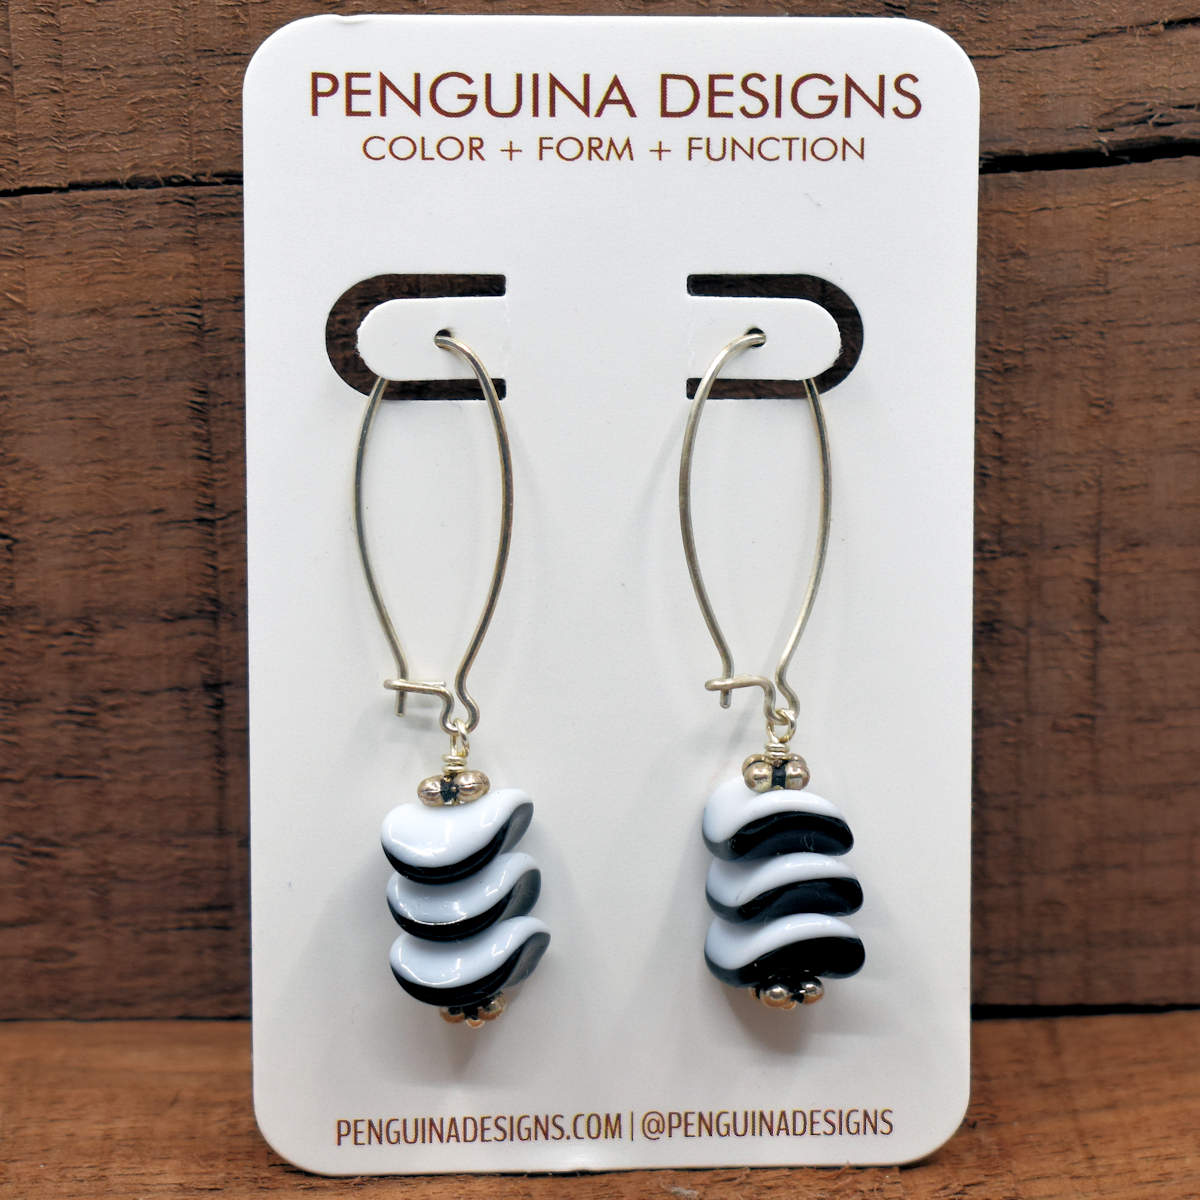 A pair of earrings on a white card rest against a wood background. The earrings have long silver oval wires that latch and the drop part of the earring is a stack of nested wave shaped beads which have black glass on their bottom halves and white on the top.